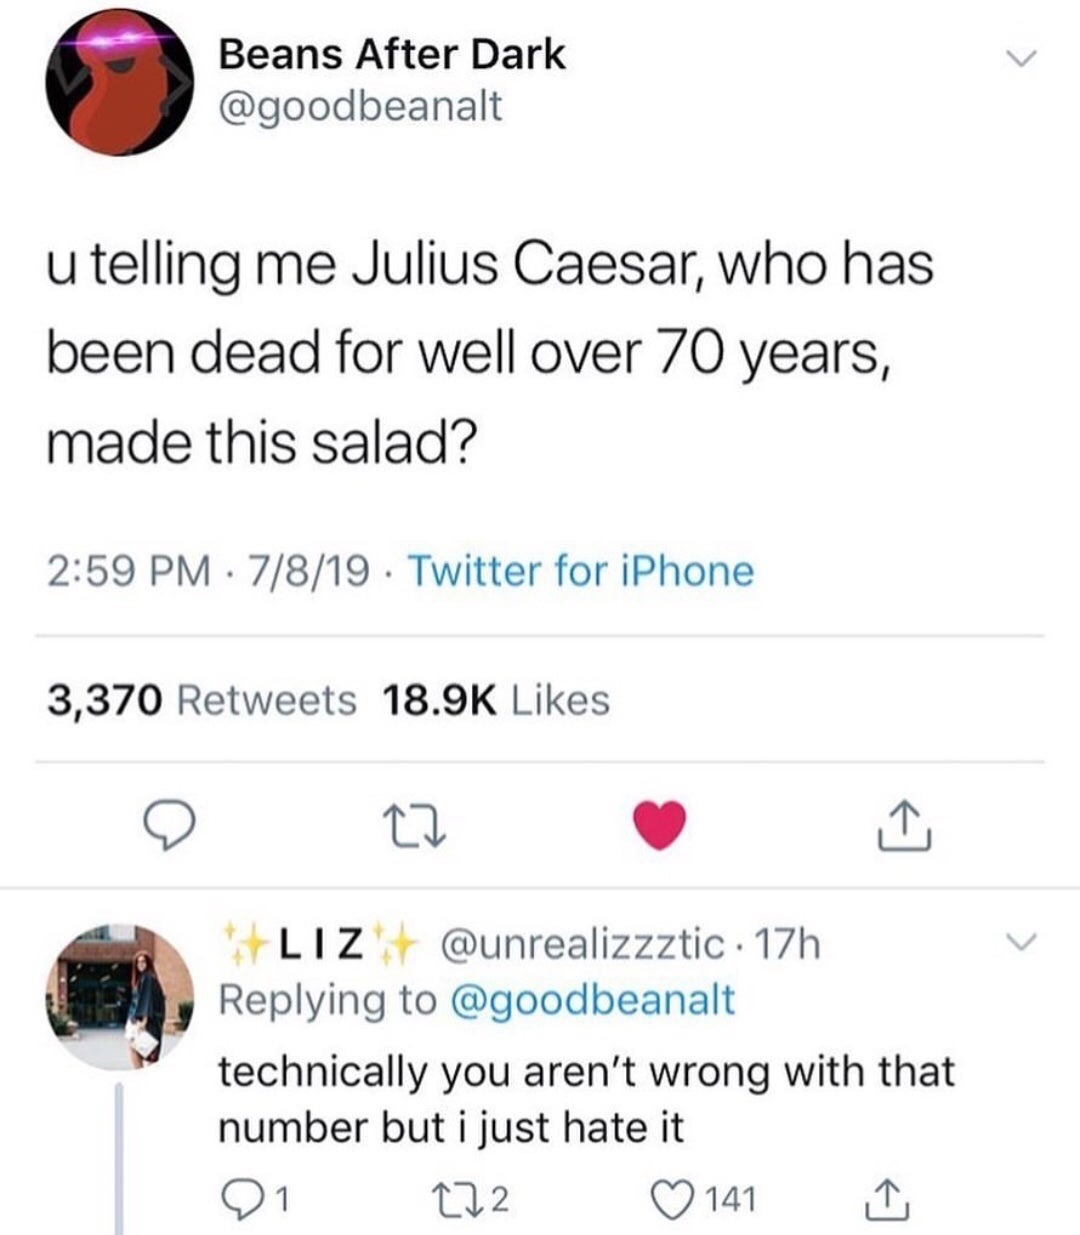 document - Beans After Dark u telling me Julius Caesar, who has been dead for well over 70 years, made this salad? 7819 . Twitter for iPhone 3,370 Liz . 17h technically you aren't wrong with that number but i just hate it